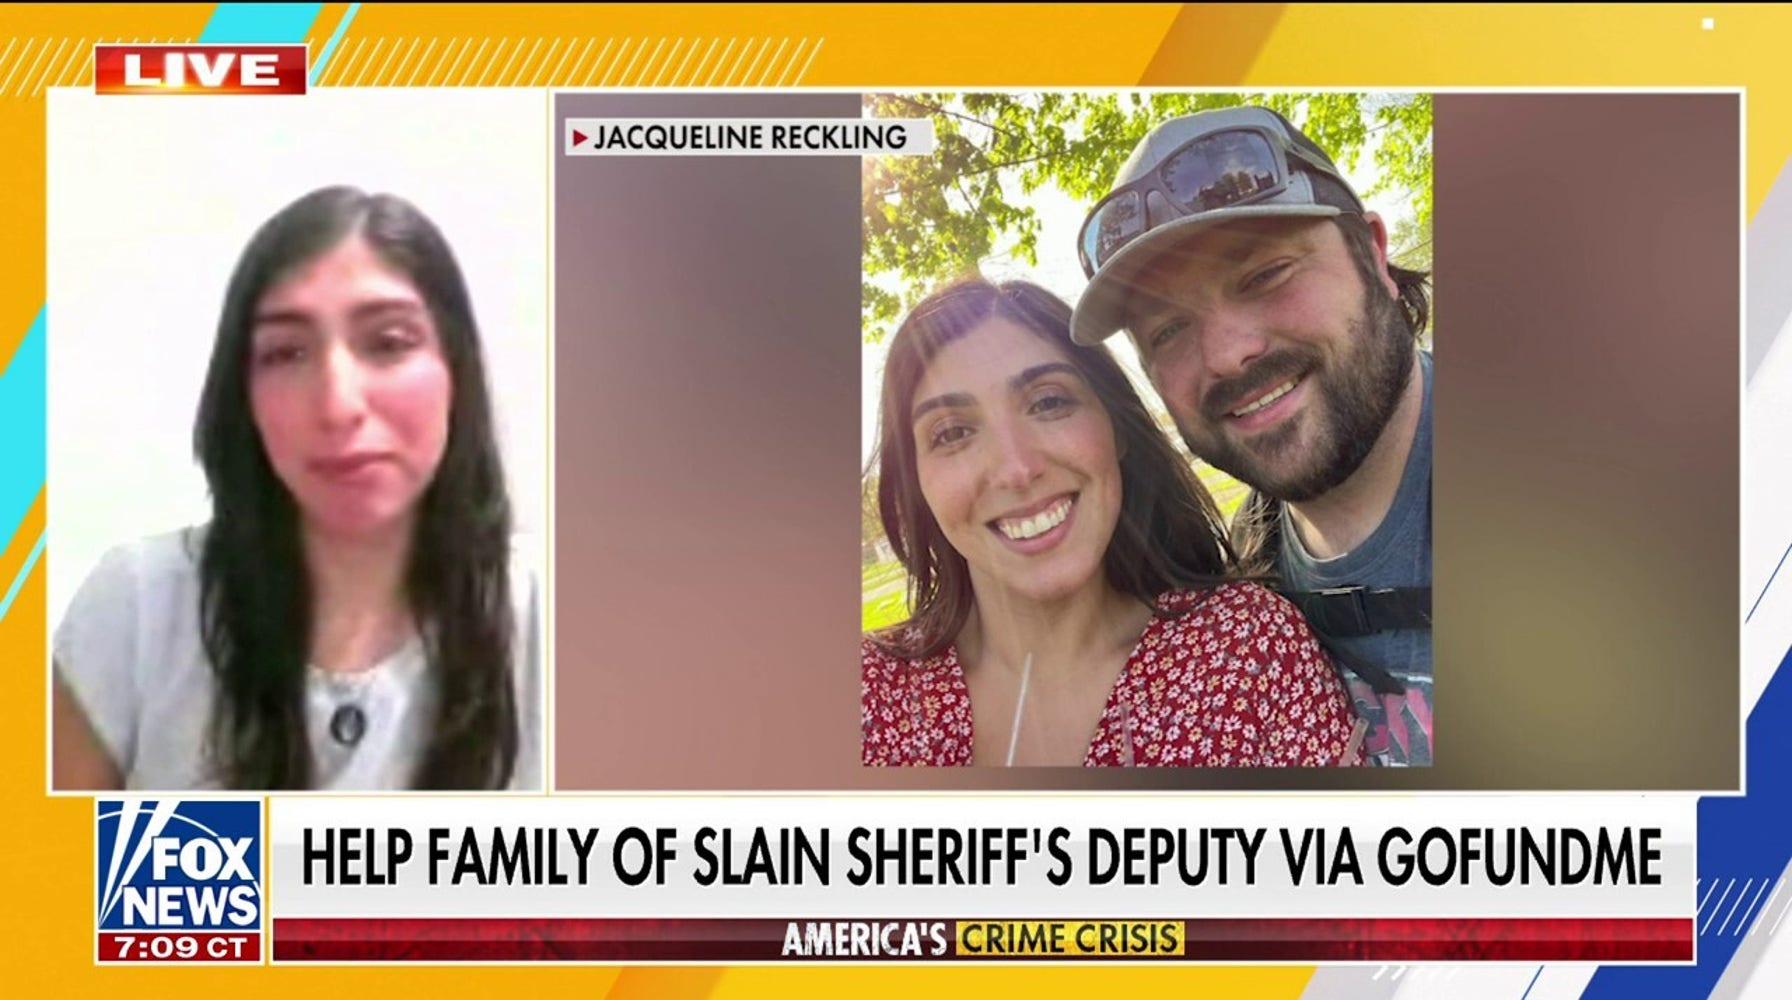 Grief and Loss: Widow of Slain Michigan Sheriff's Deputy Speaks Out